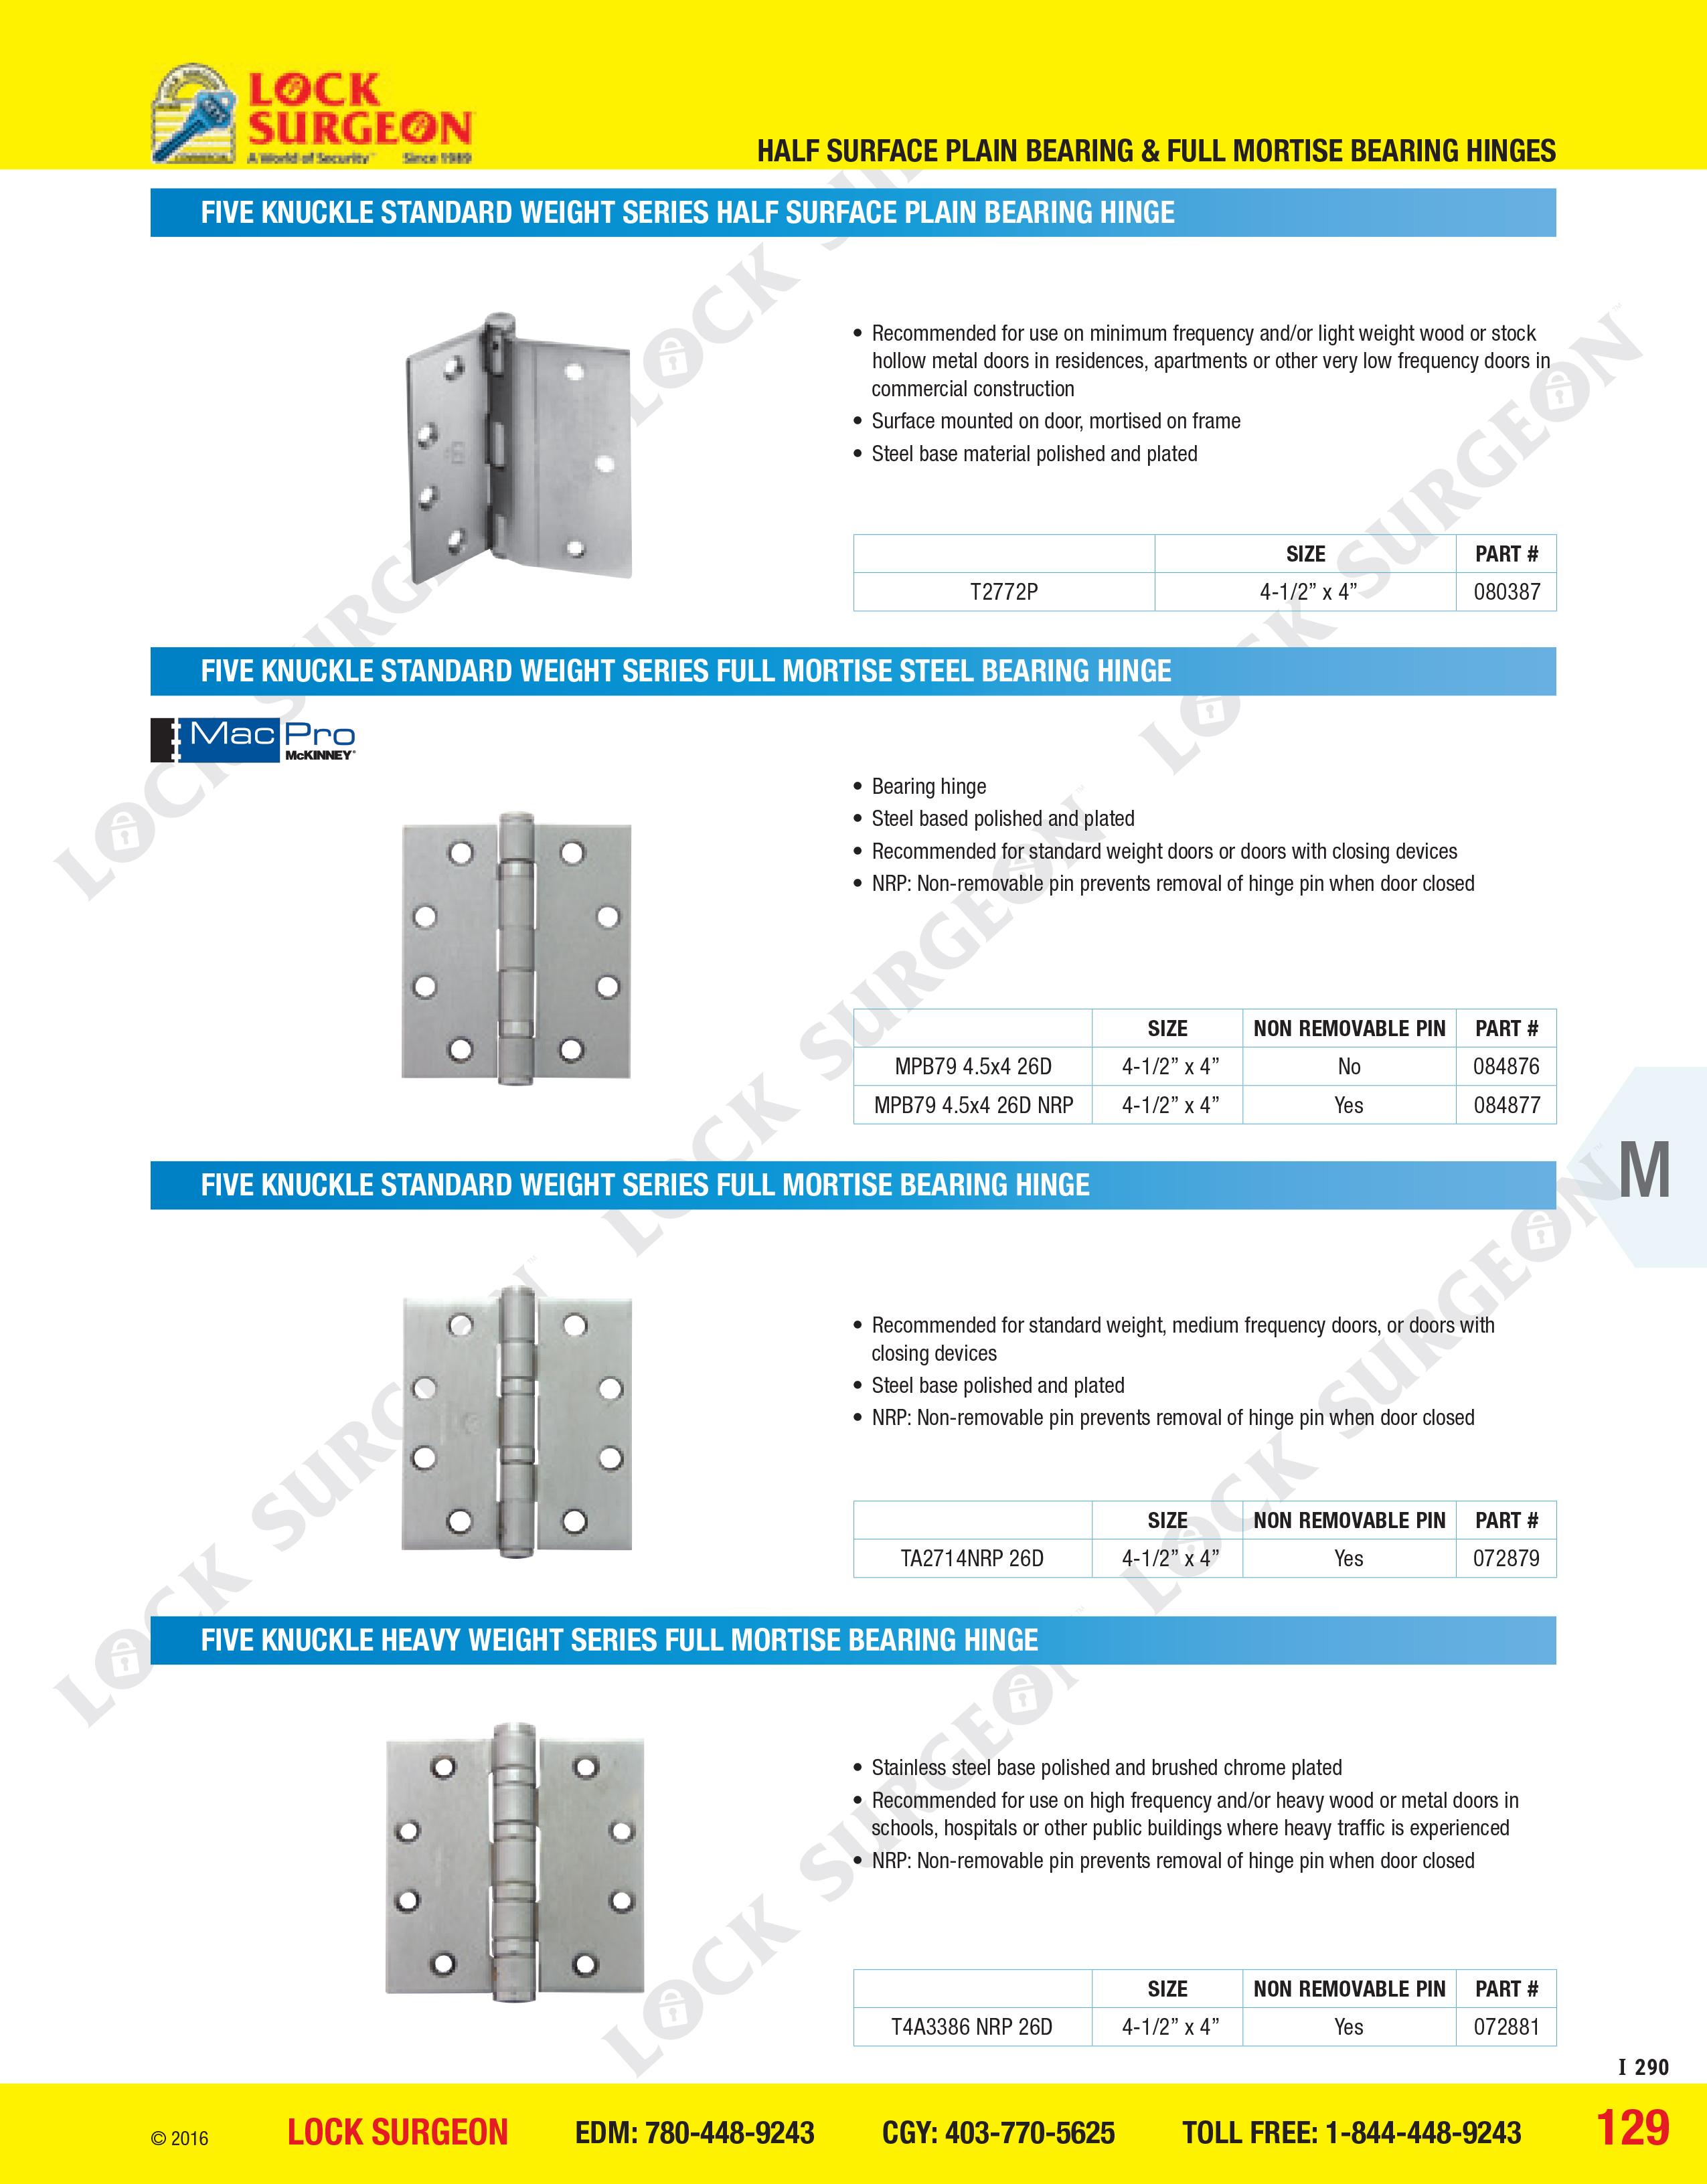 Half Surface Plain Bearing & Full Mortise Bearing Hinges for commercial industrial doors.